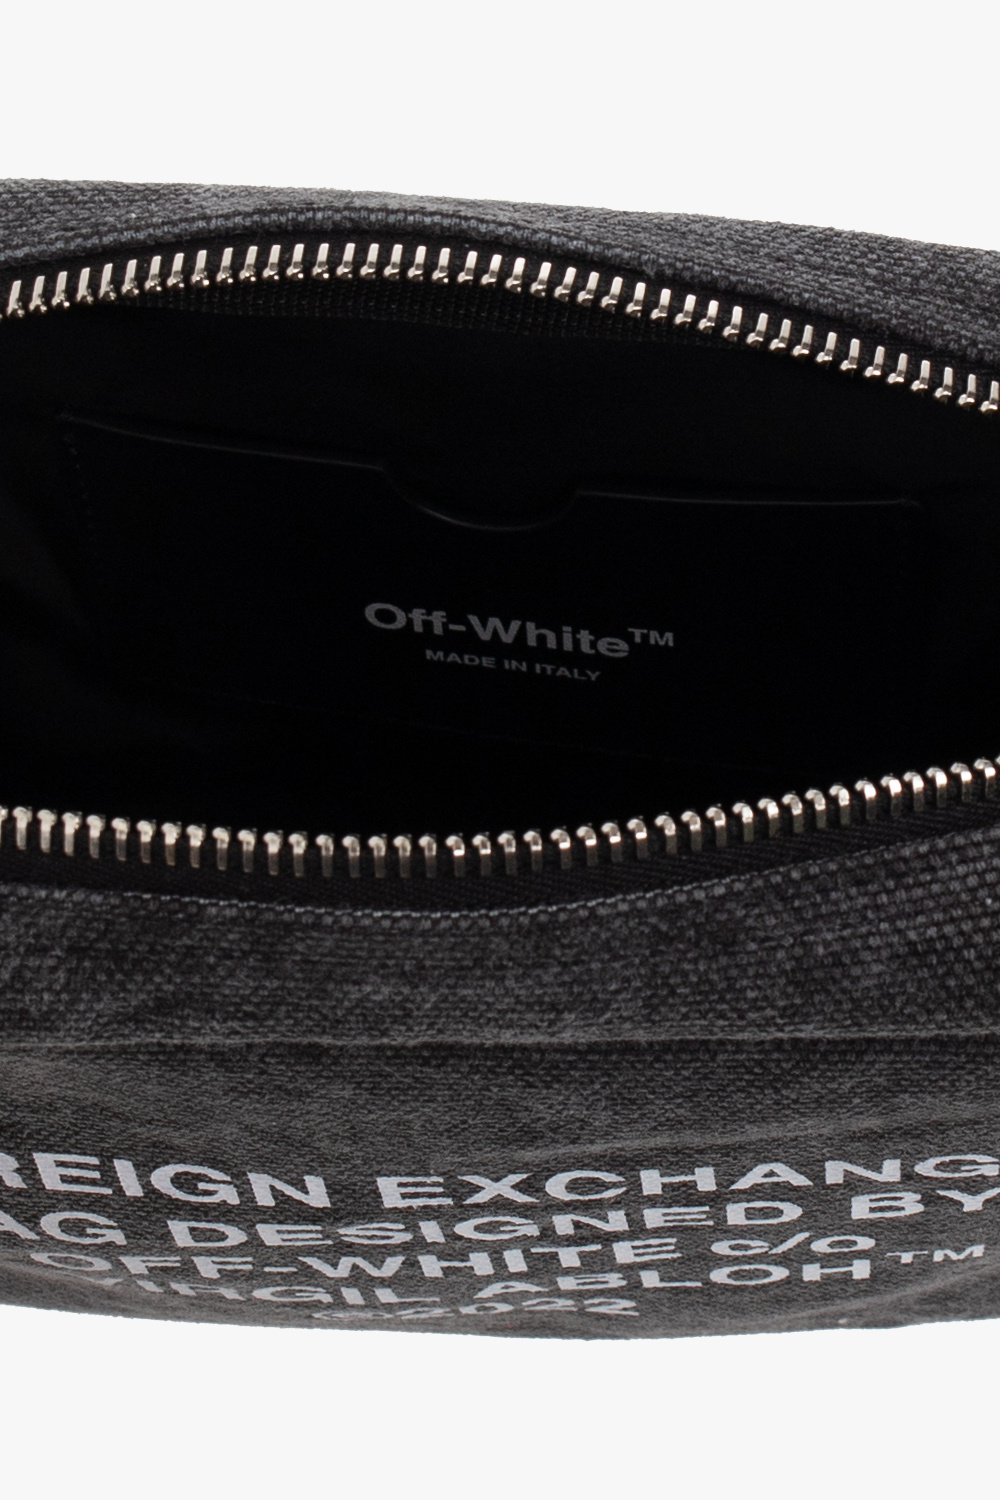 Off-White Moncler Legere Large Tote Bag